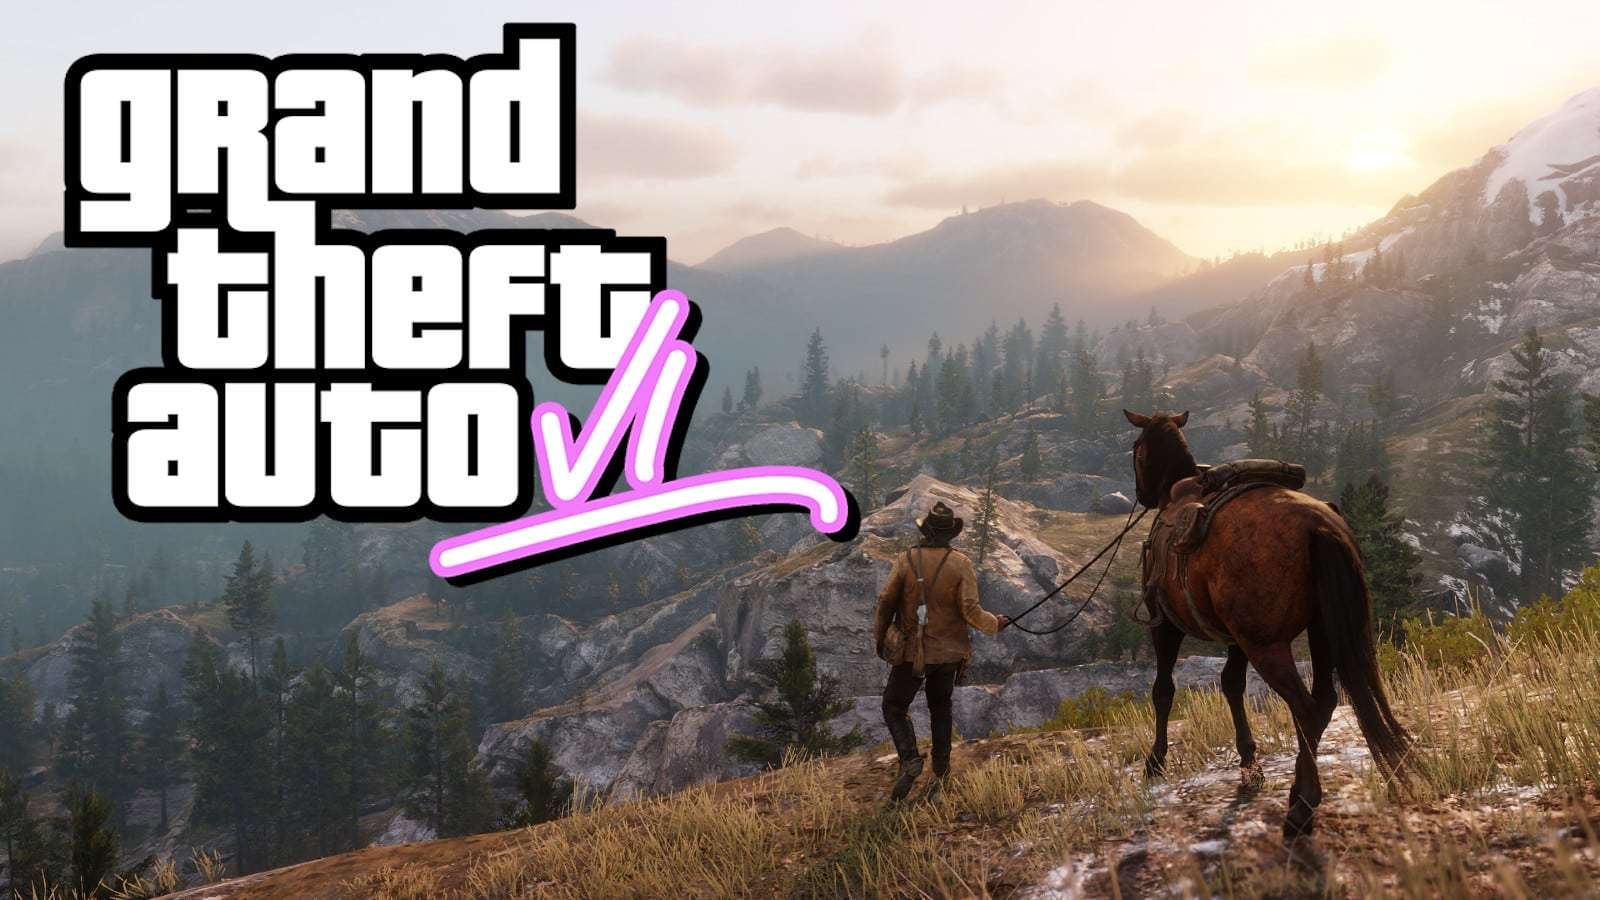 GTA 6 teases in red dead redemption 2